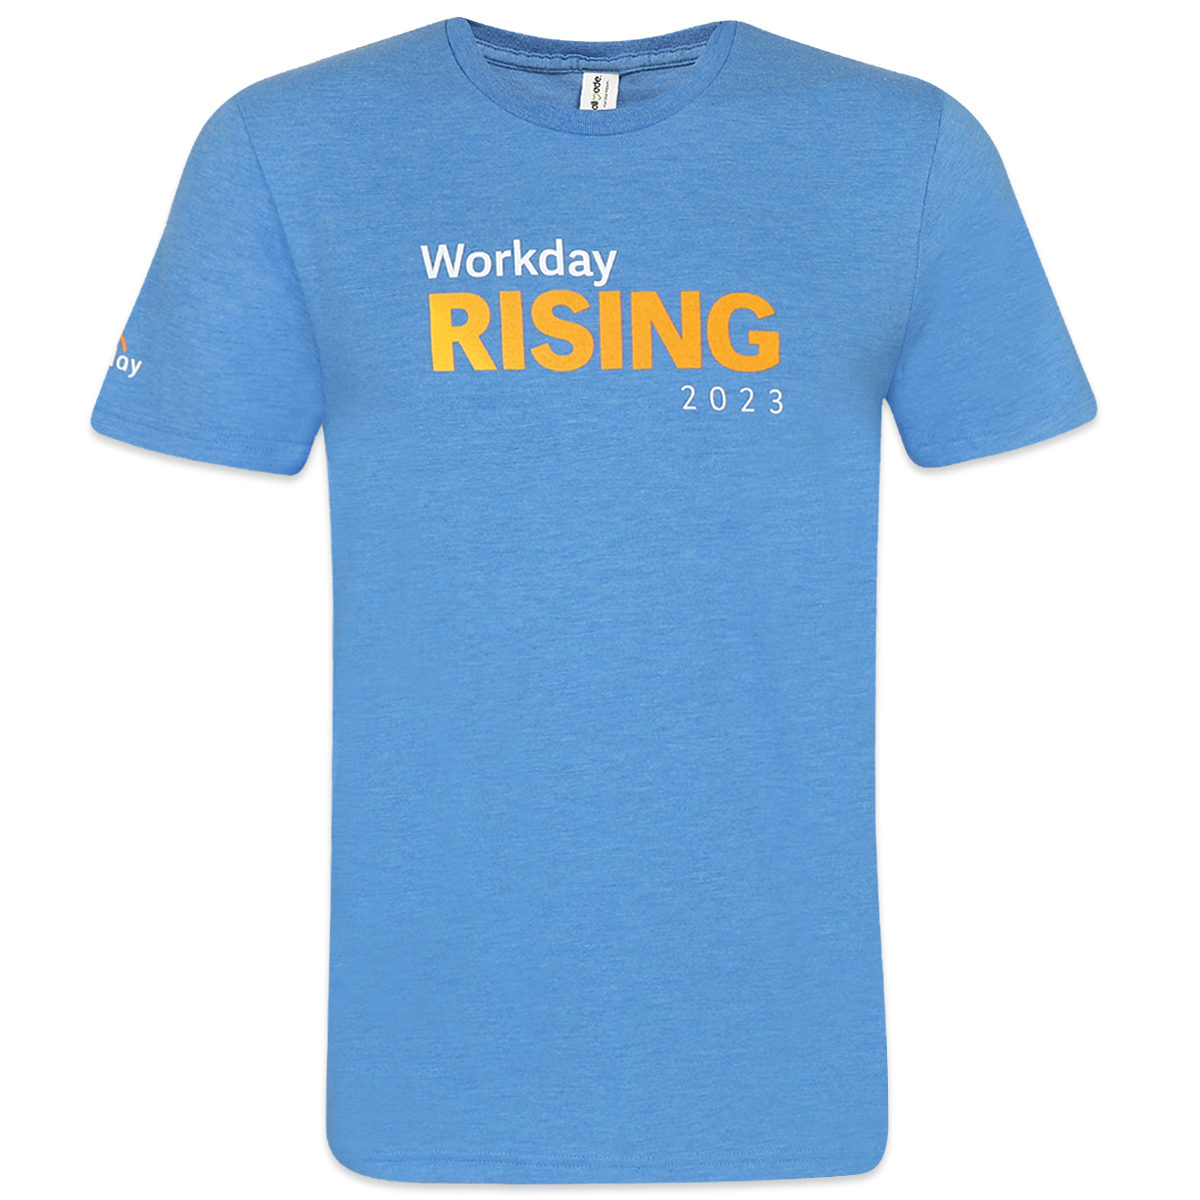 2023 Workday Rising Unisex Tri-Blend Tee